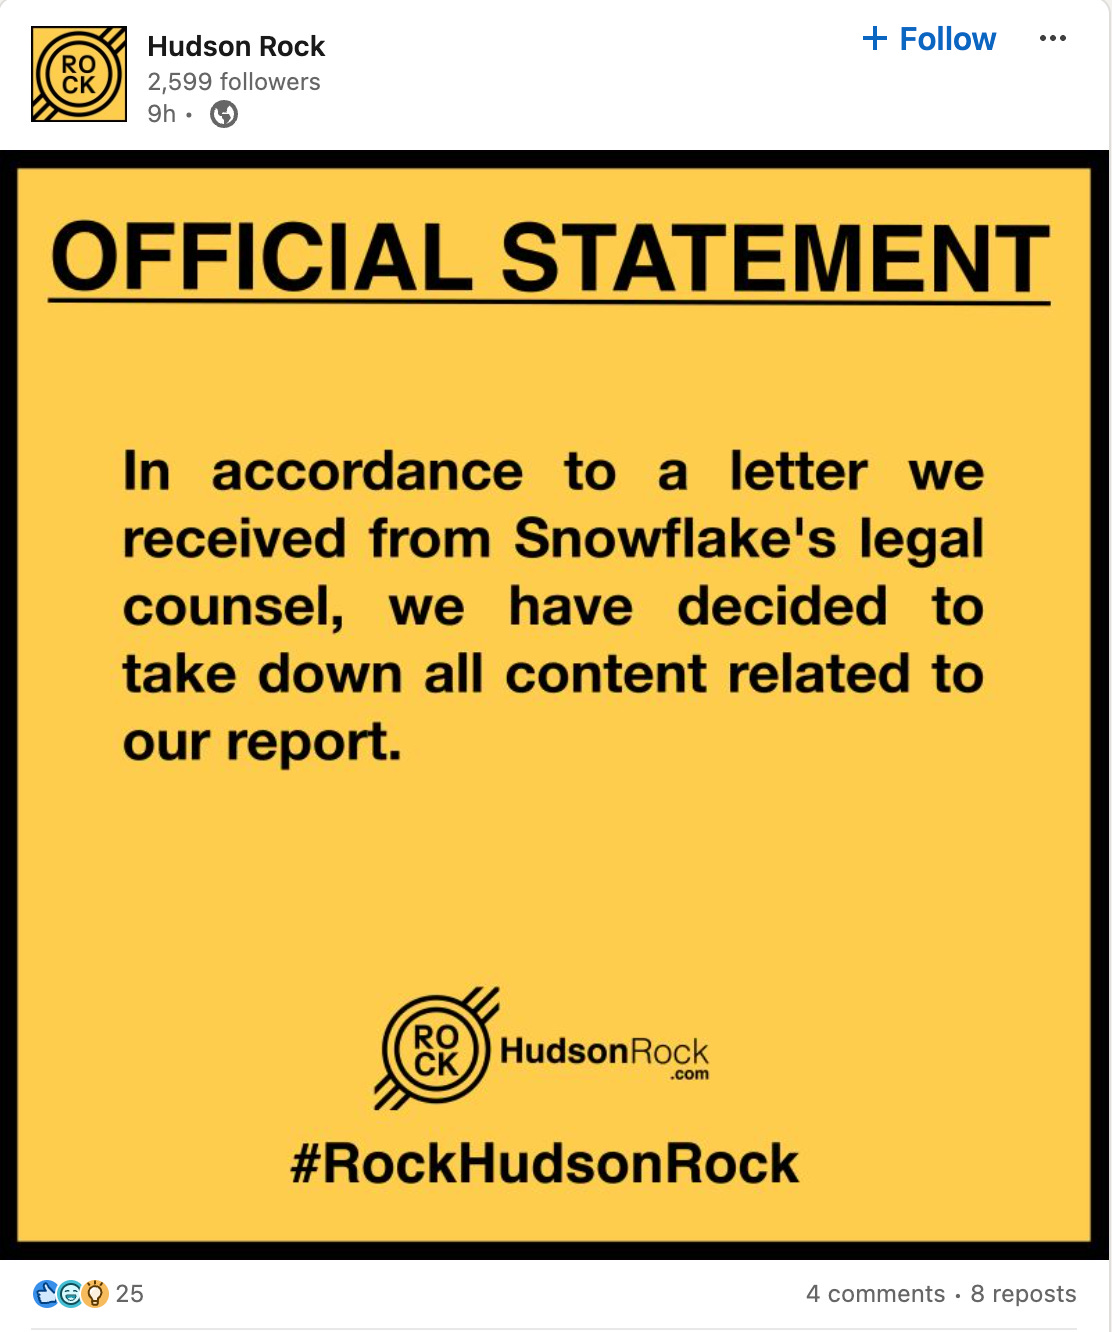 A screenshot from Hudson Rock's LinkedIn claiming they took down the Snowflake report